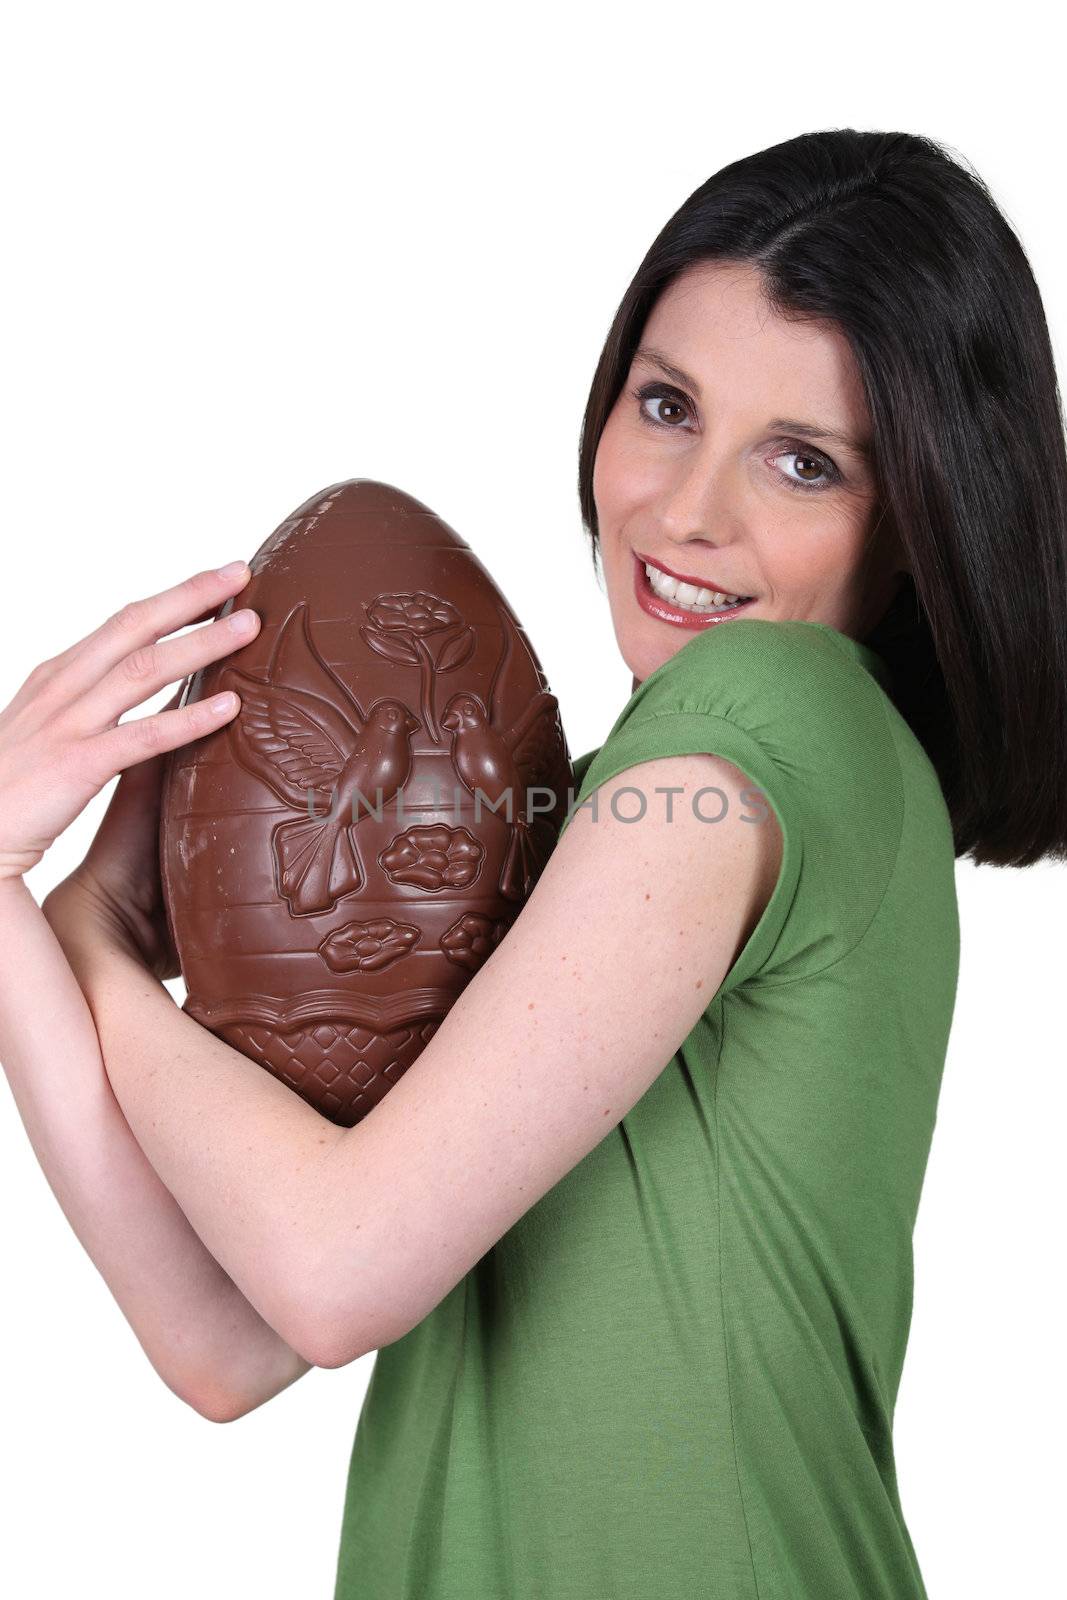 Woman holding a large chocolate Easter egg by phovoir